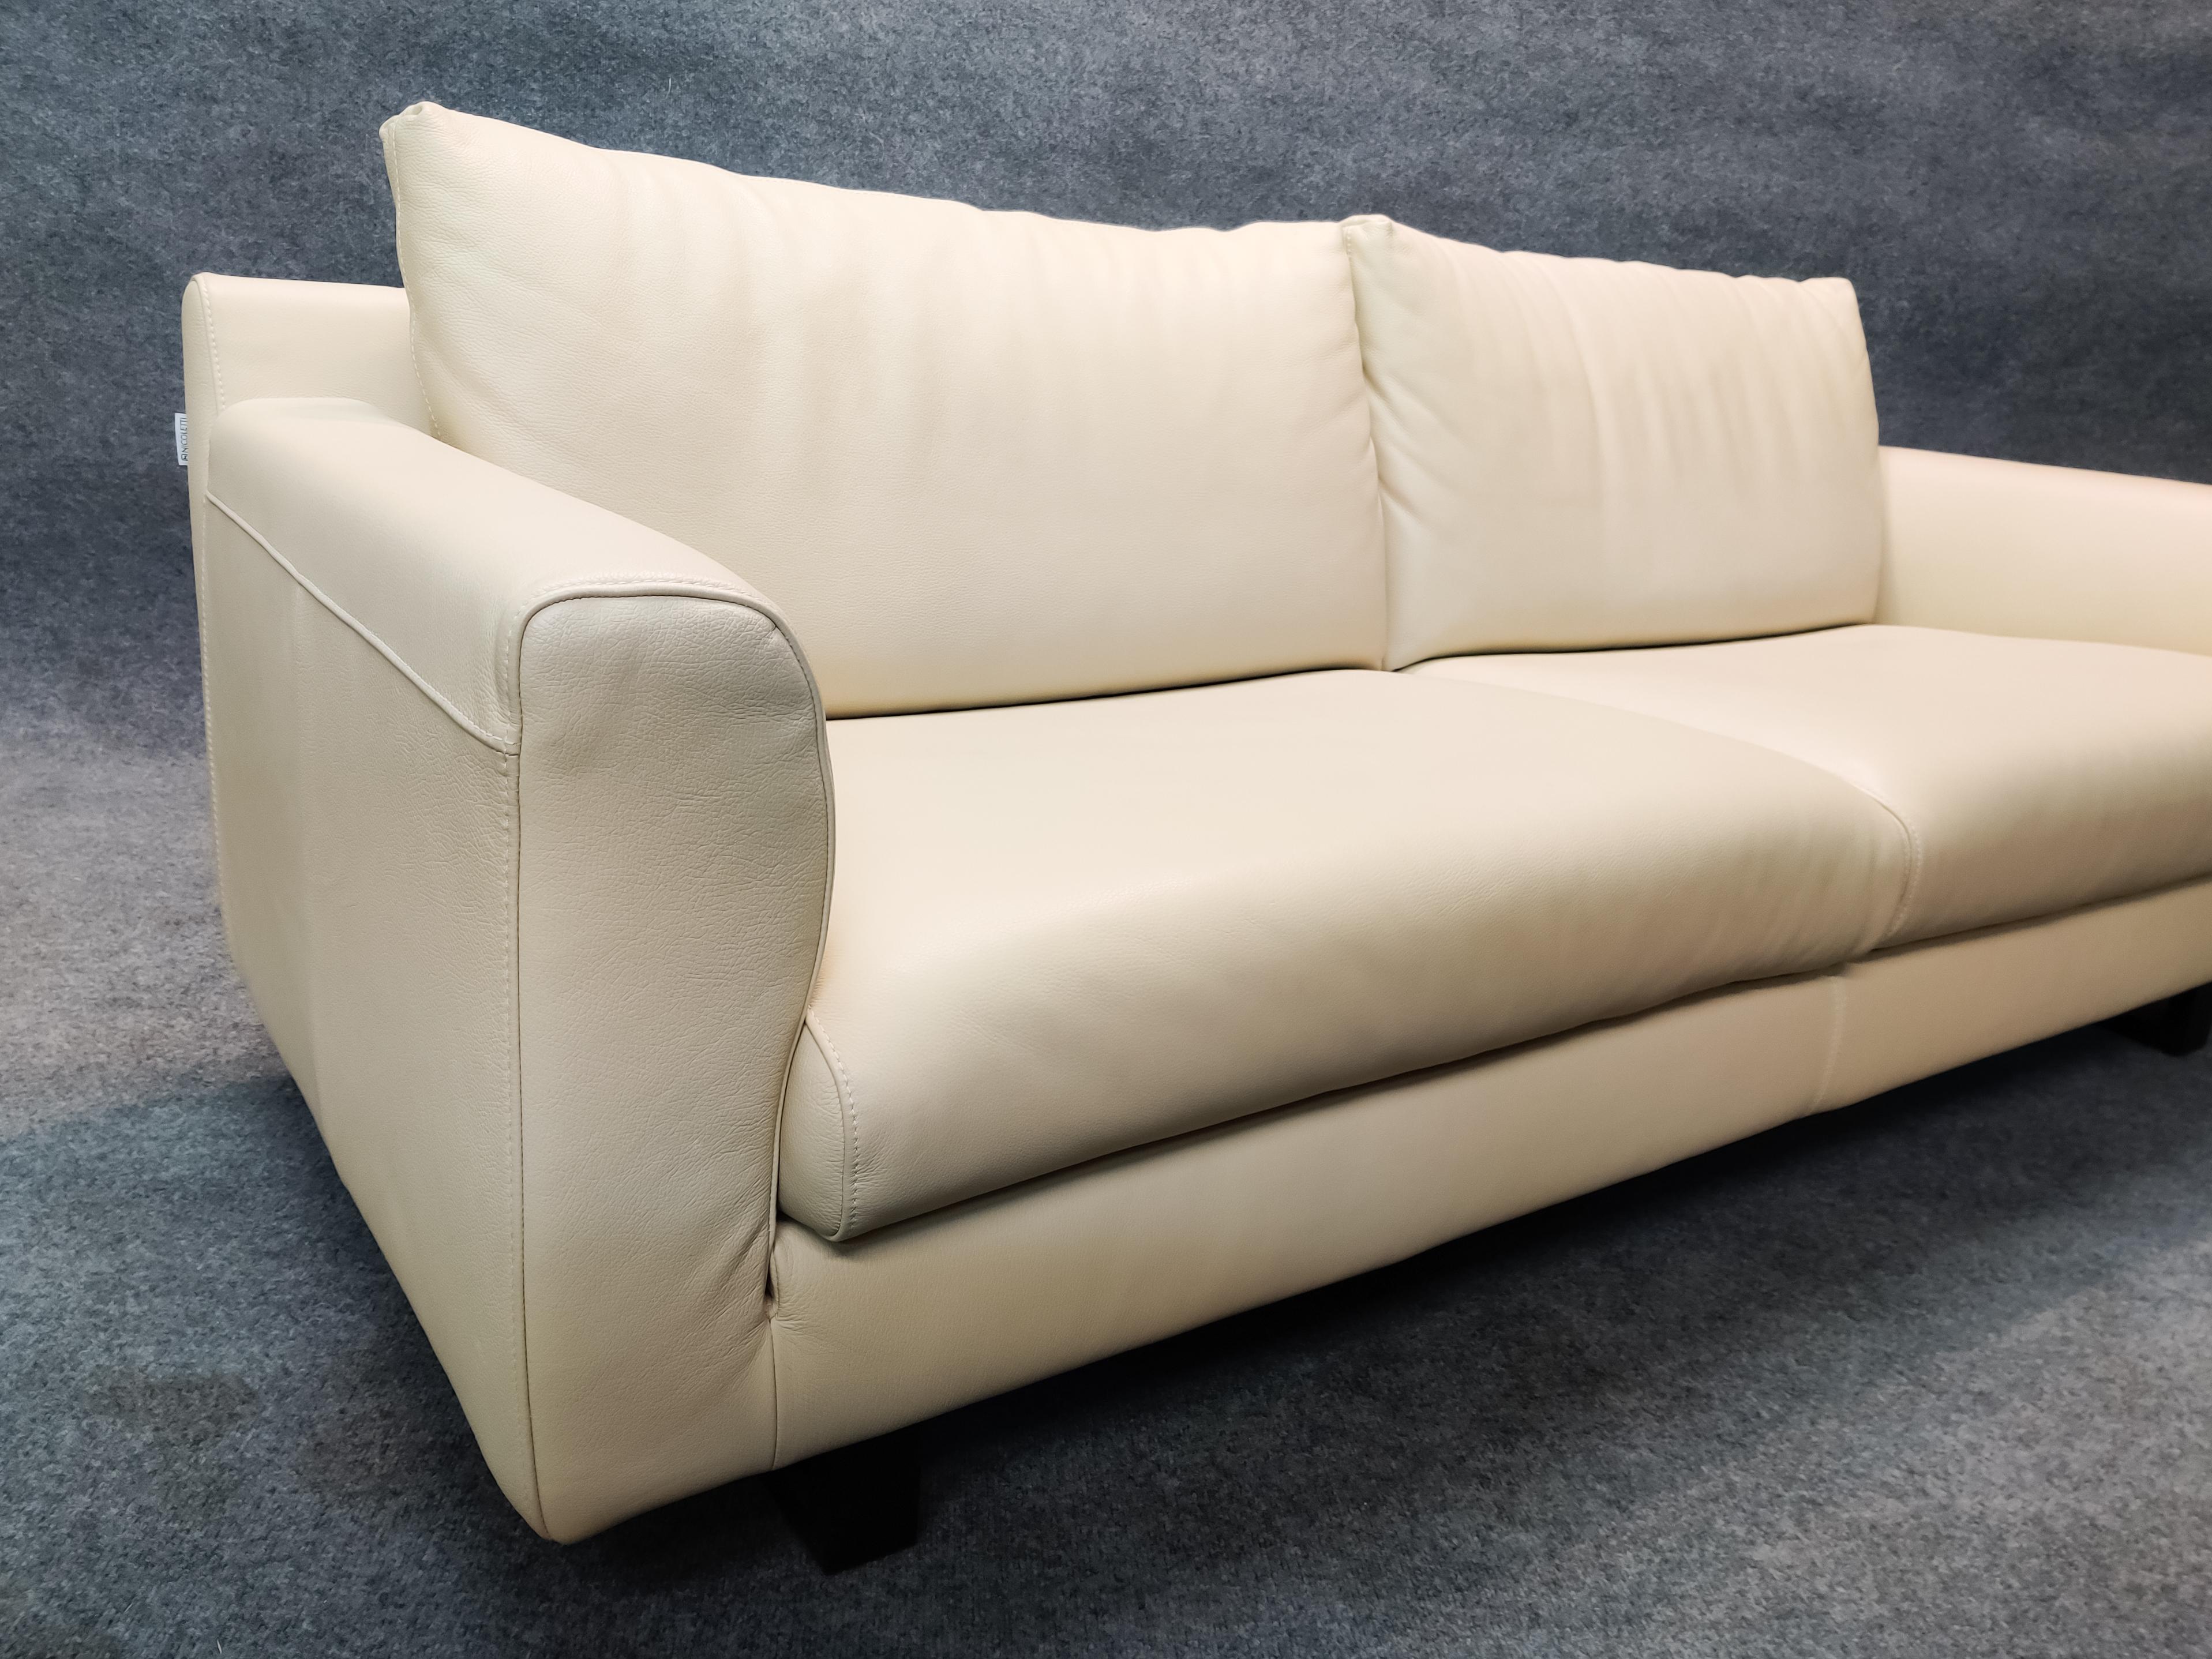 Post-Modern & Sleek Fine Top-Grain Off-White Leather Sofa by Nicoletti of Italy 2